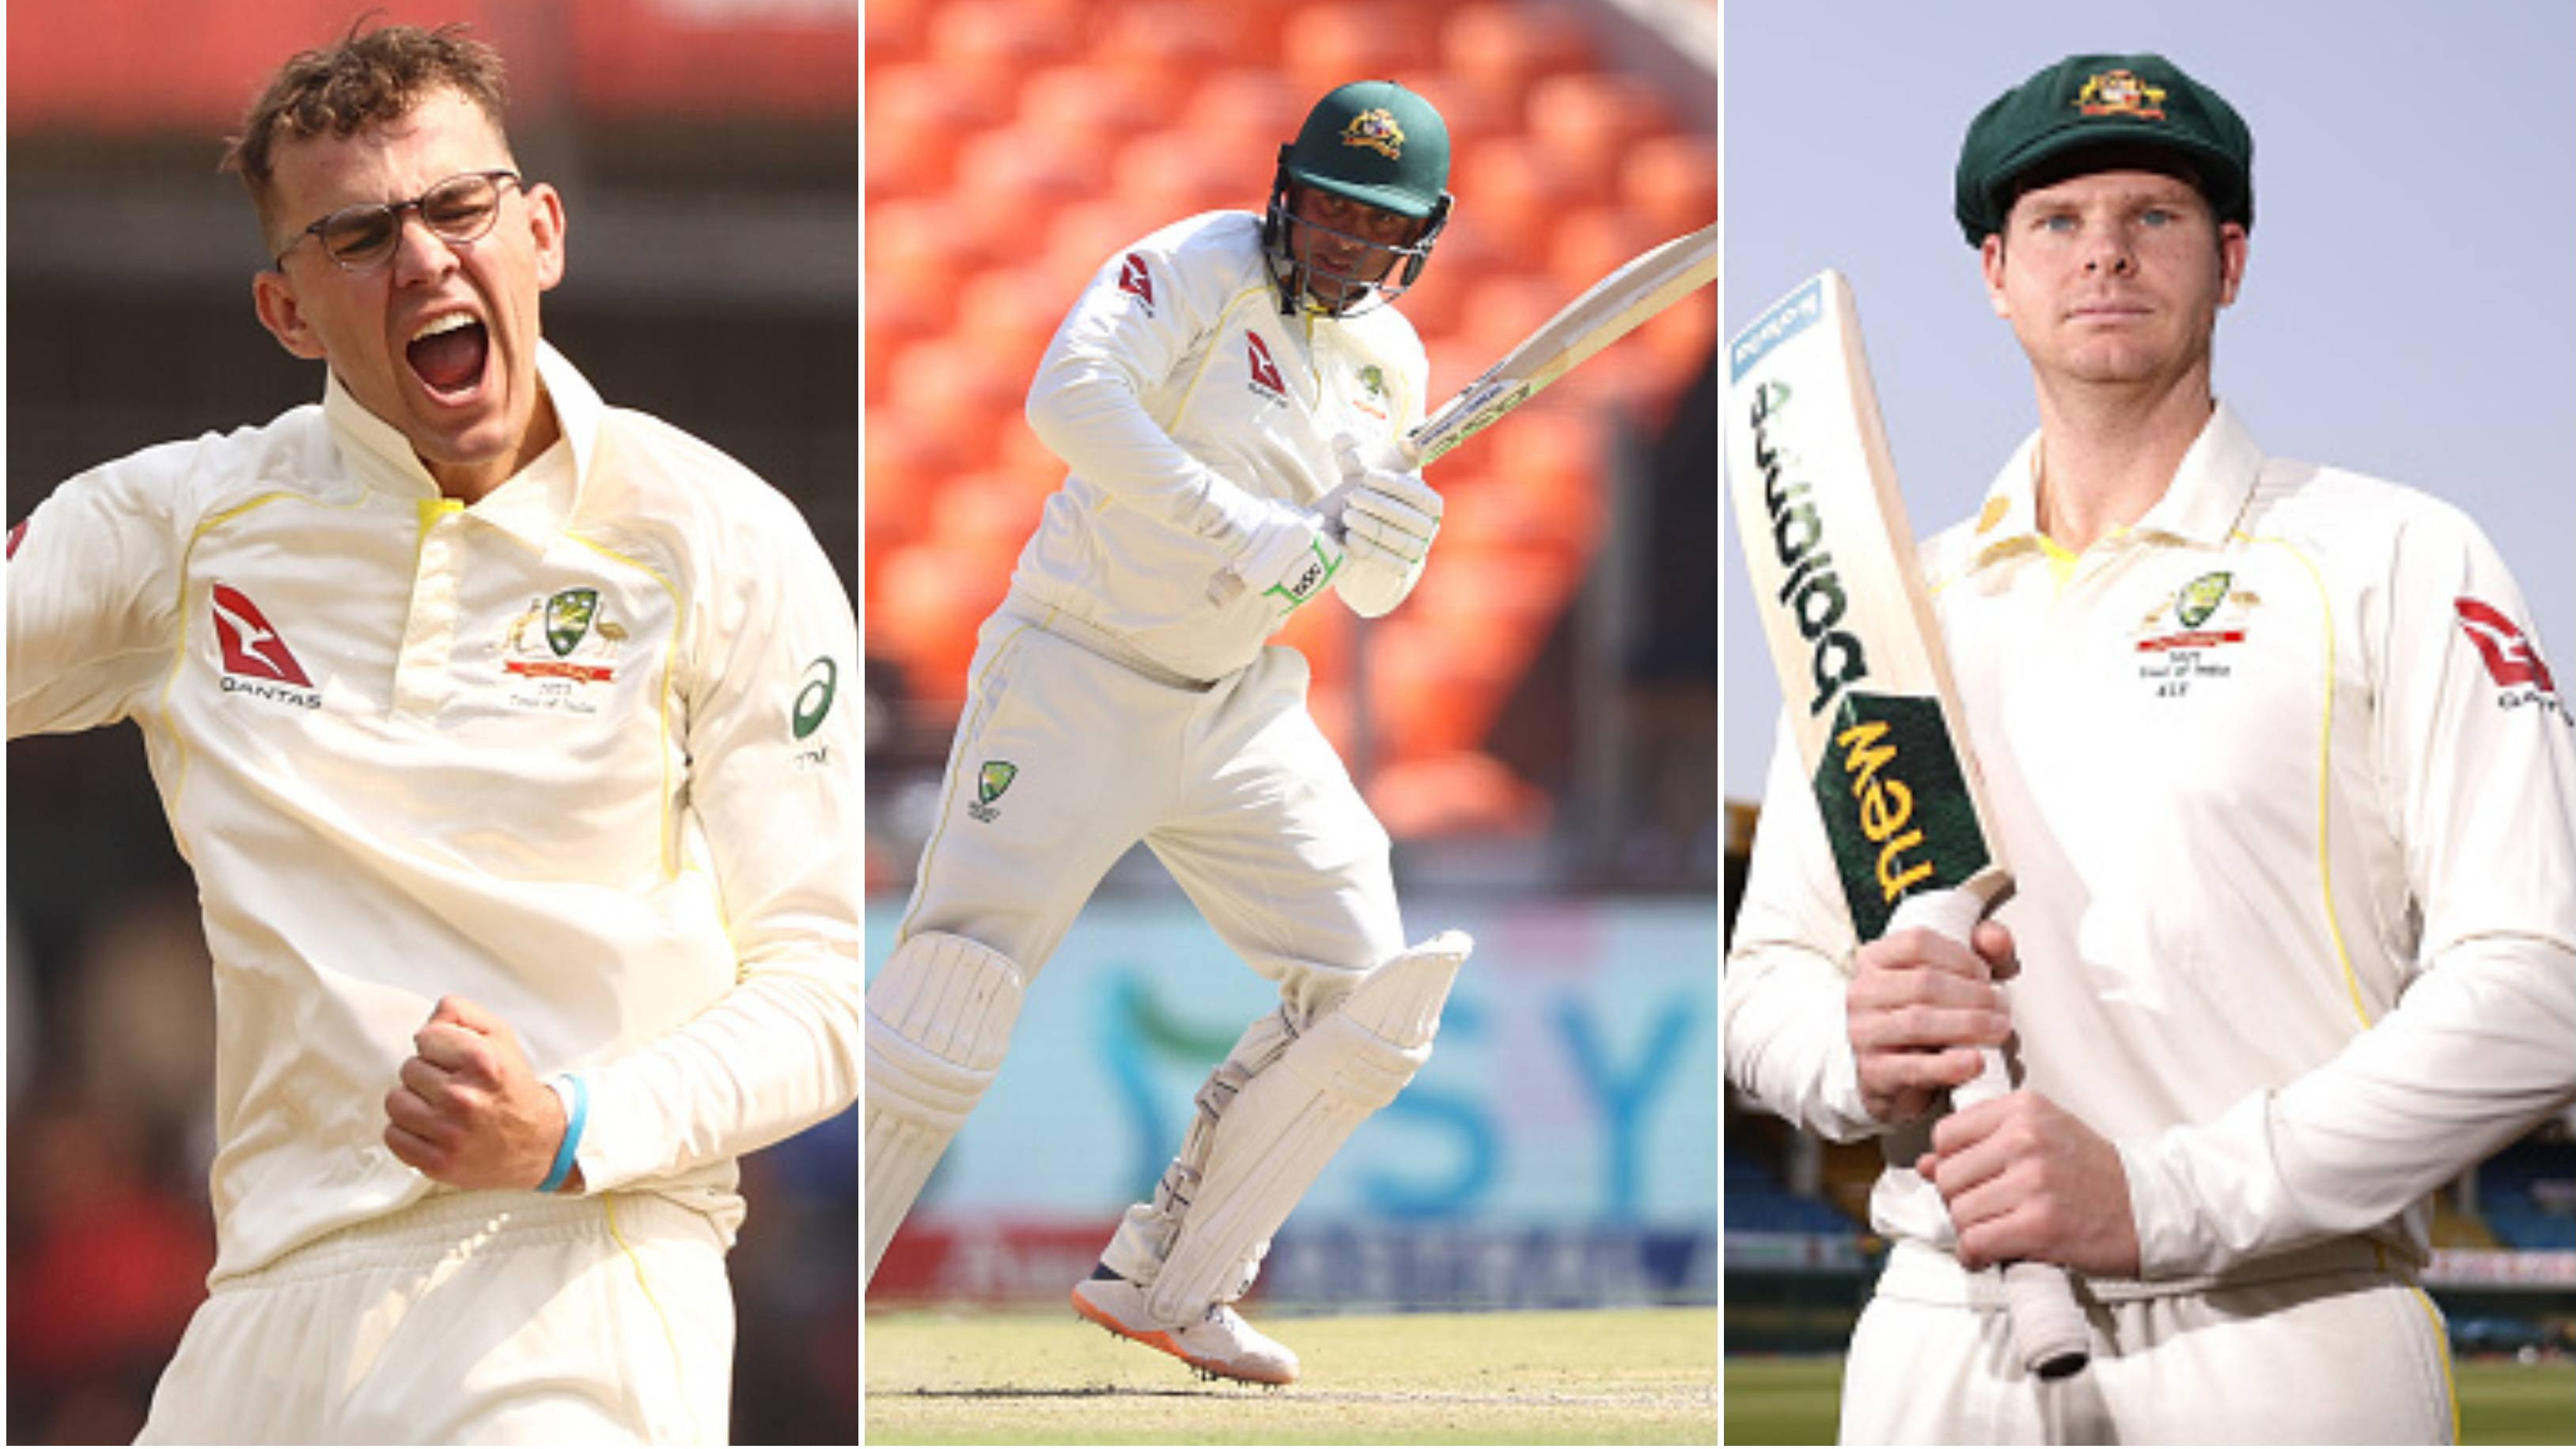 IND v AUS 2023: Ashwin impressed with Todd Murphy, Usman Khawaja’s exploits, lauds Smith’s captaincy during Test series